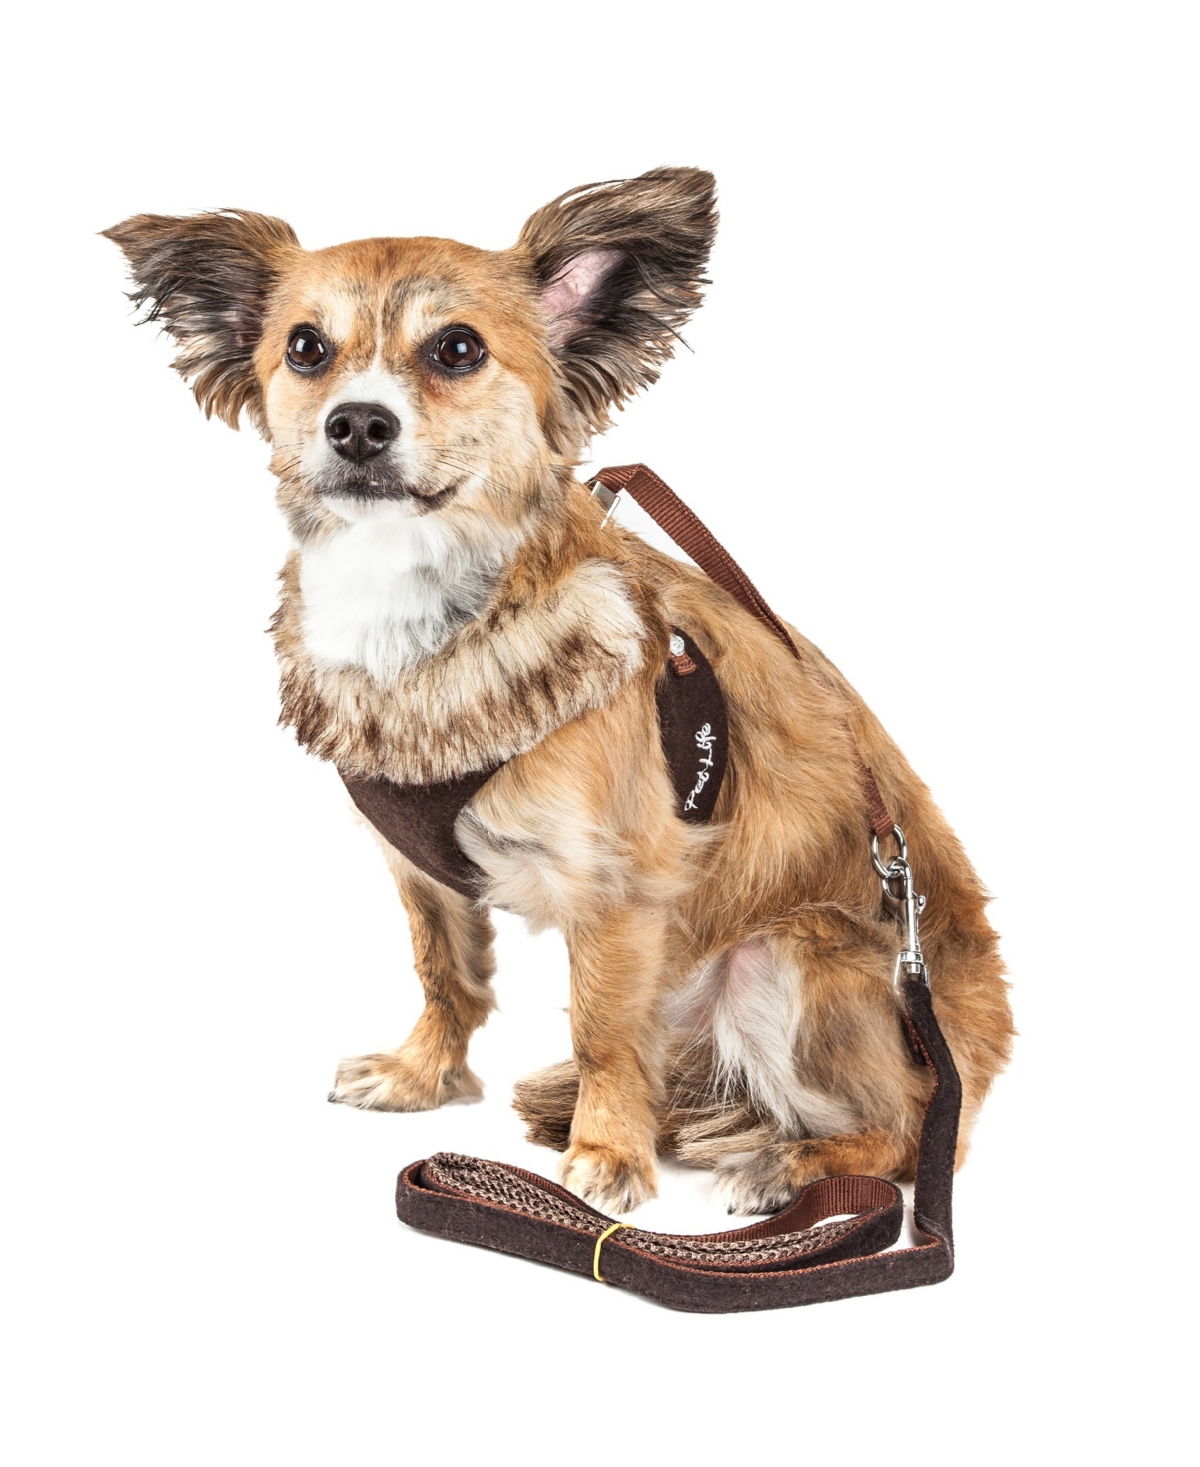 Luxe 'Furracious' 2-in-1 Dog Harness Leash with Removable Faux Fur Collar - Brown